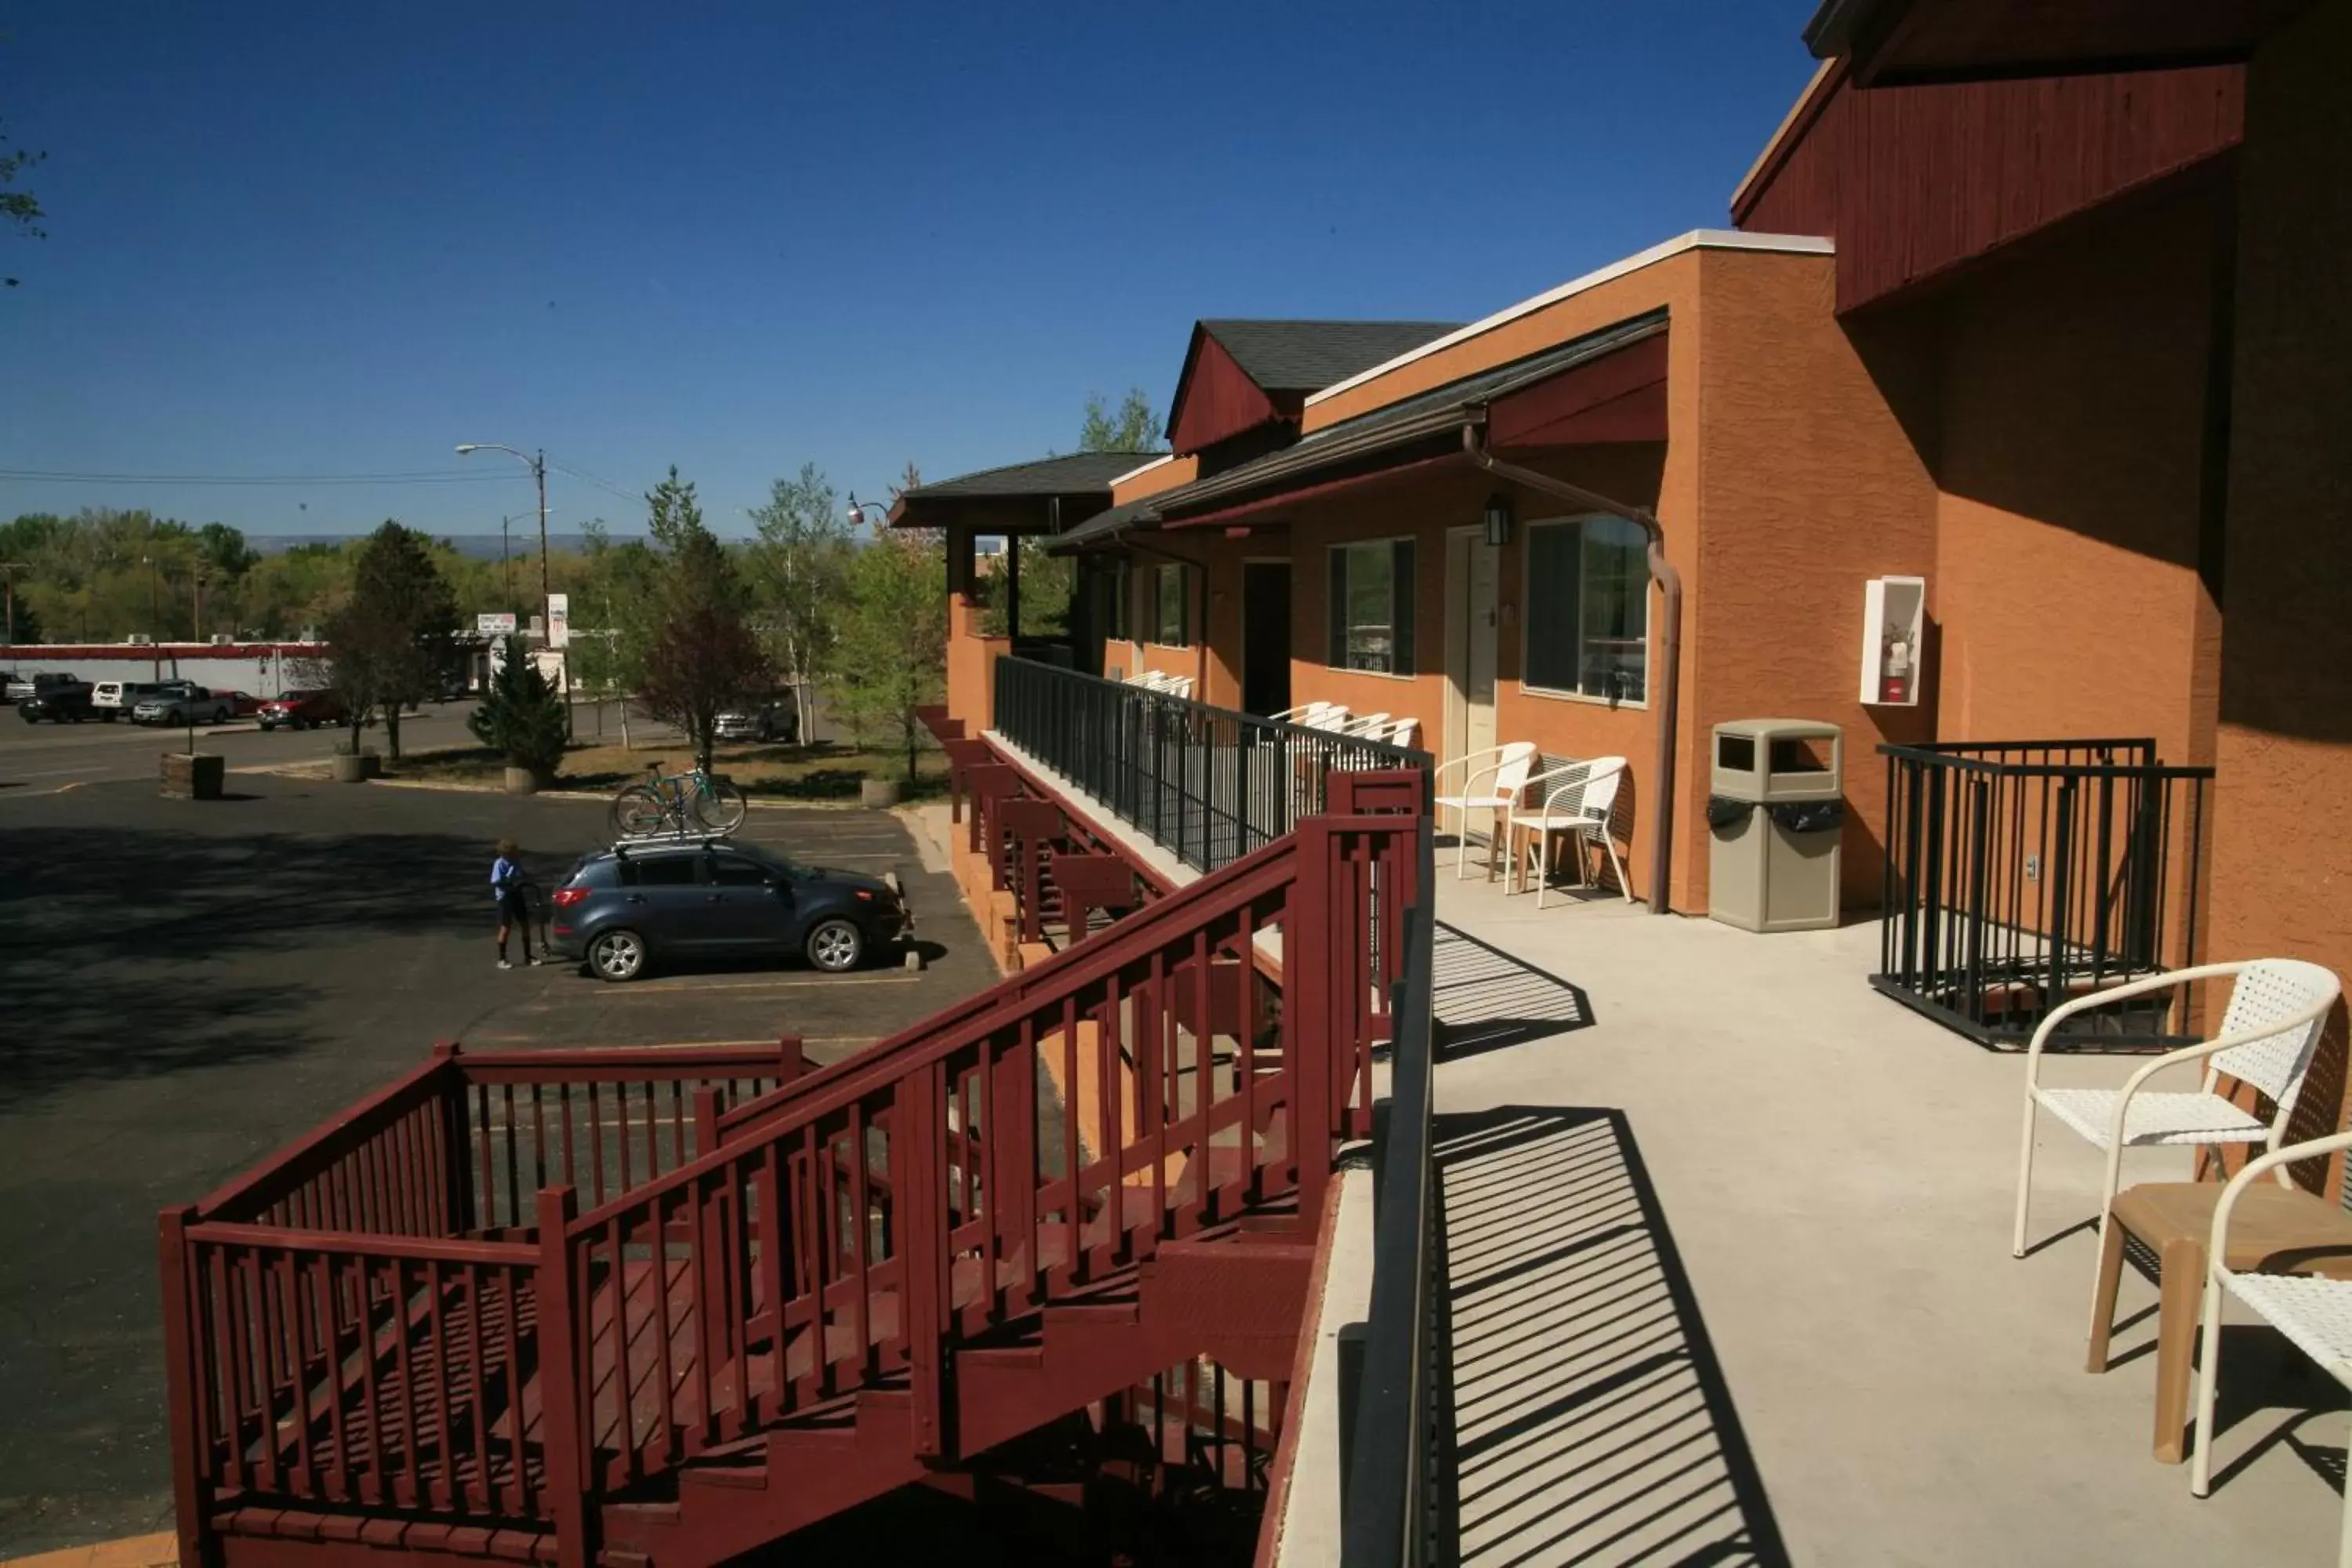 Property building in Black Canyon Motel